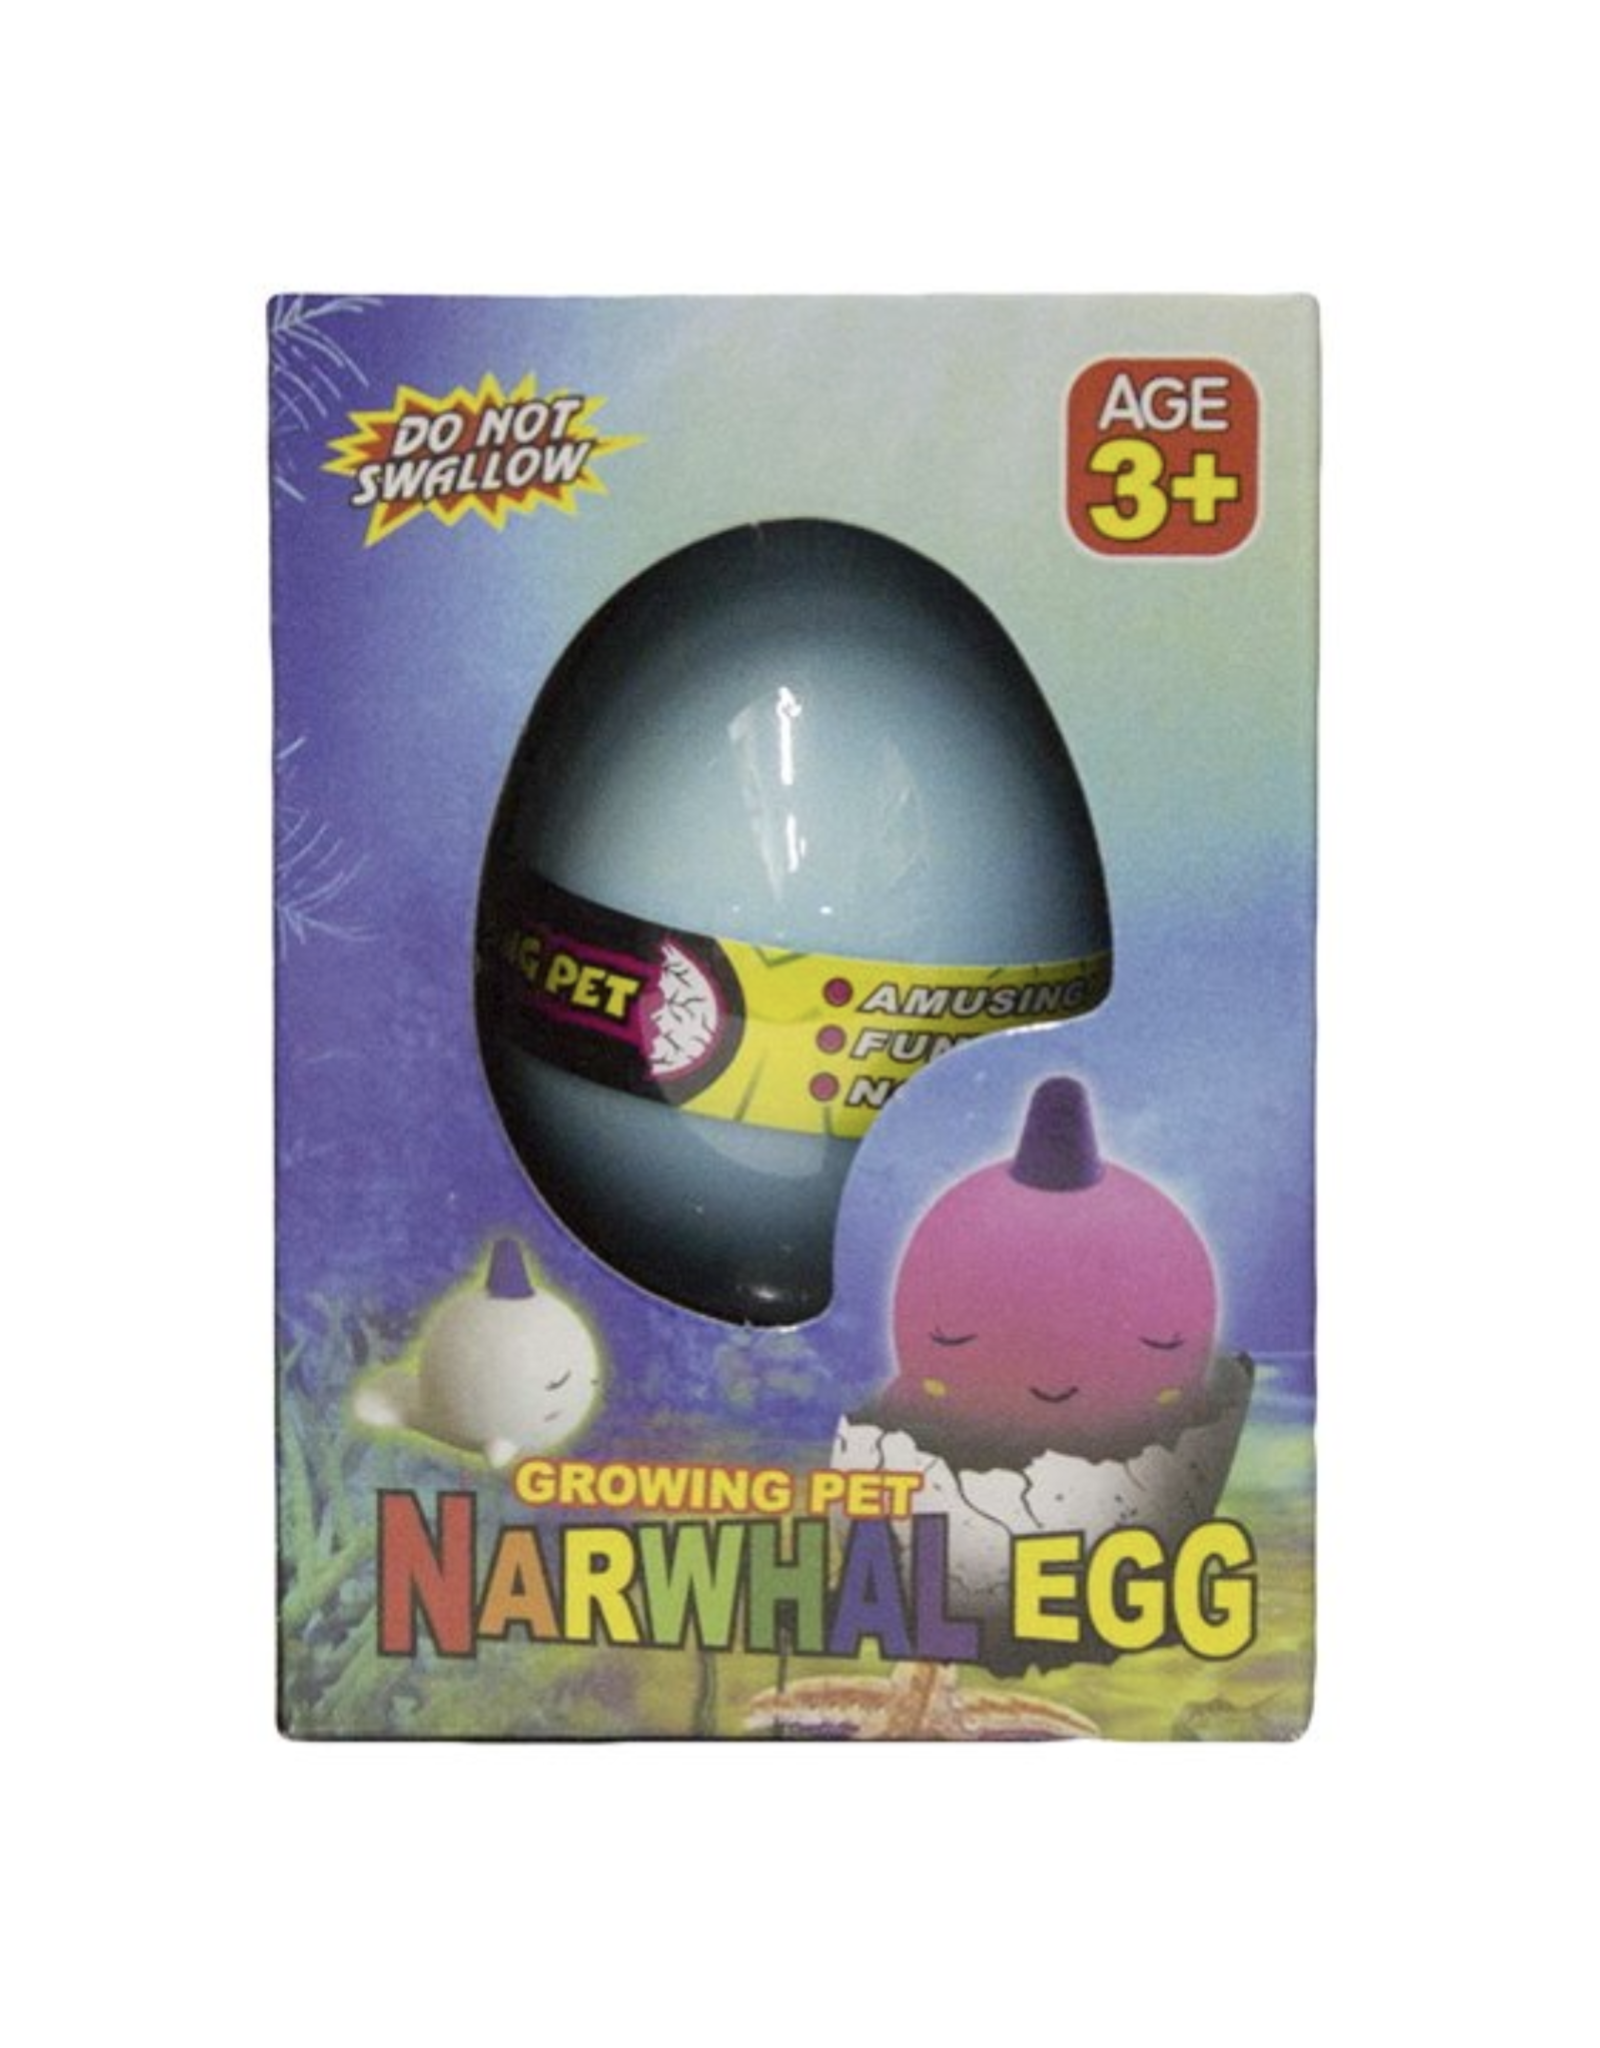 Pet Narwhal Growing Egg